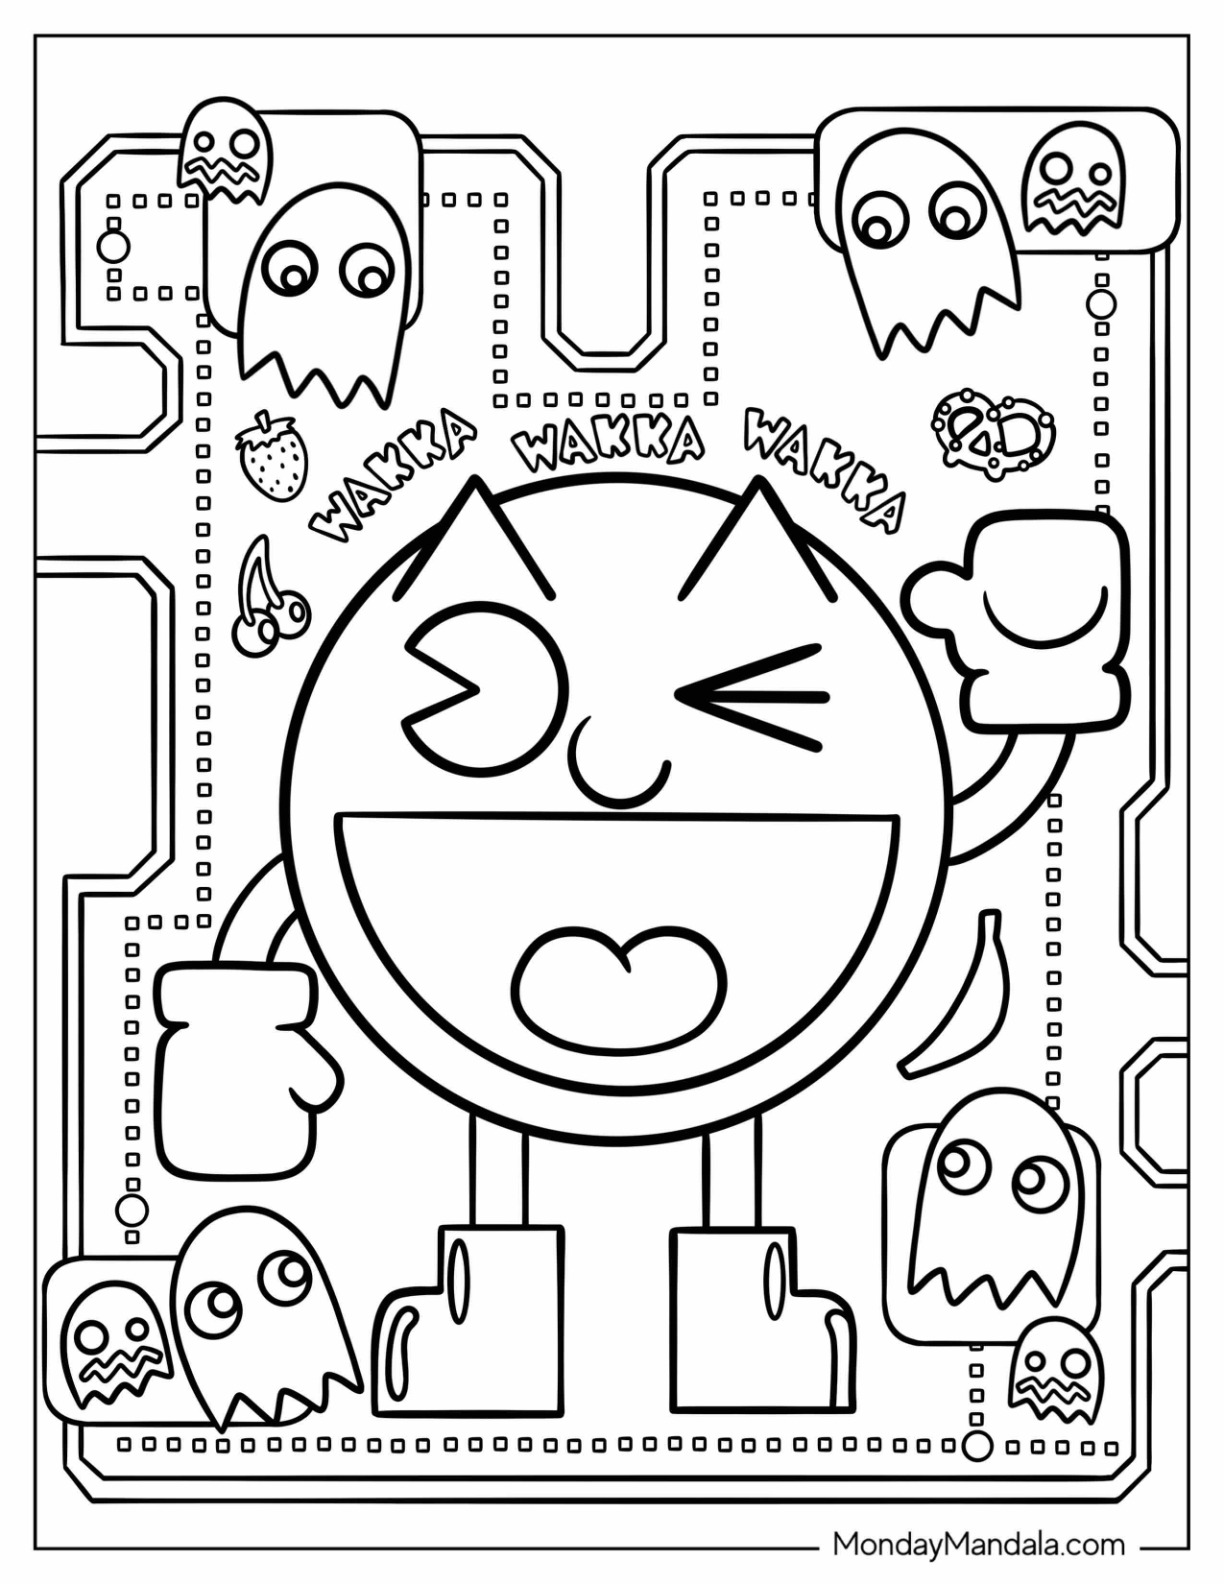 Pac man coloring pages free pdf printables